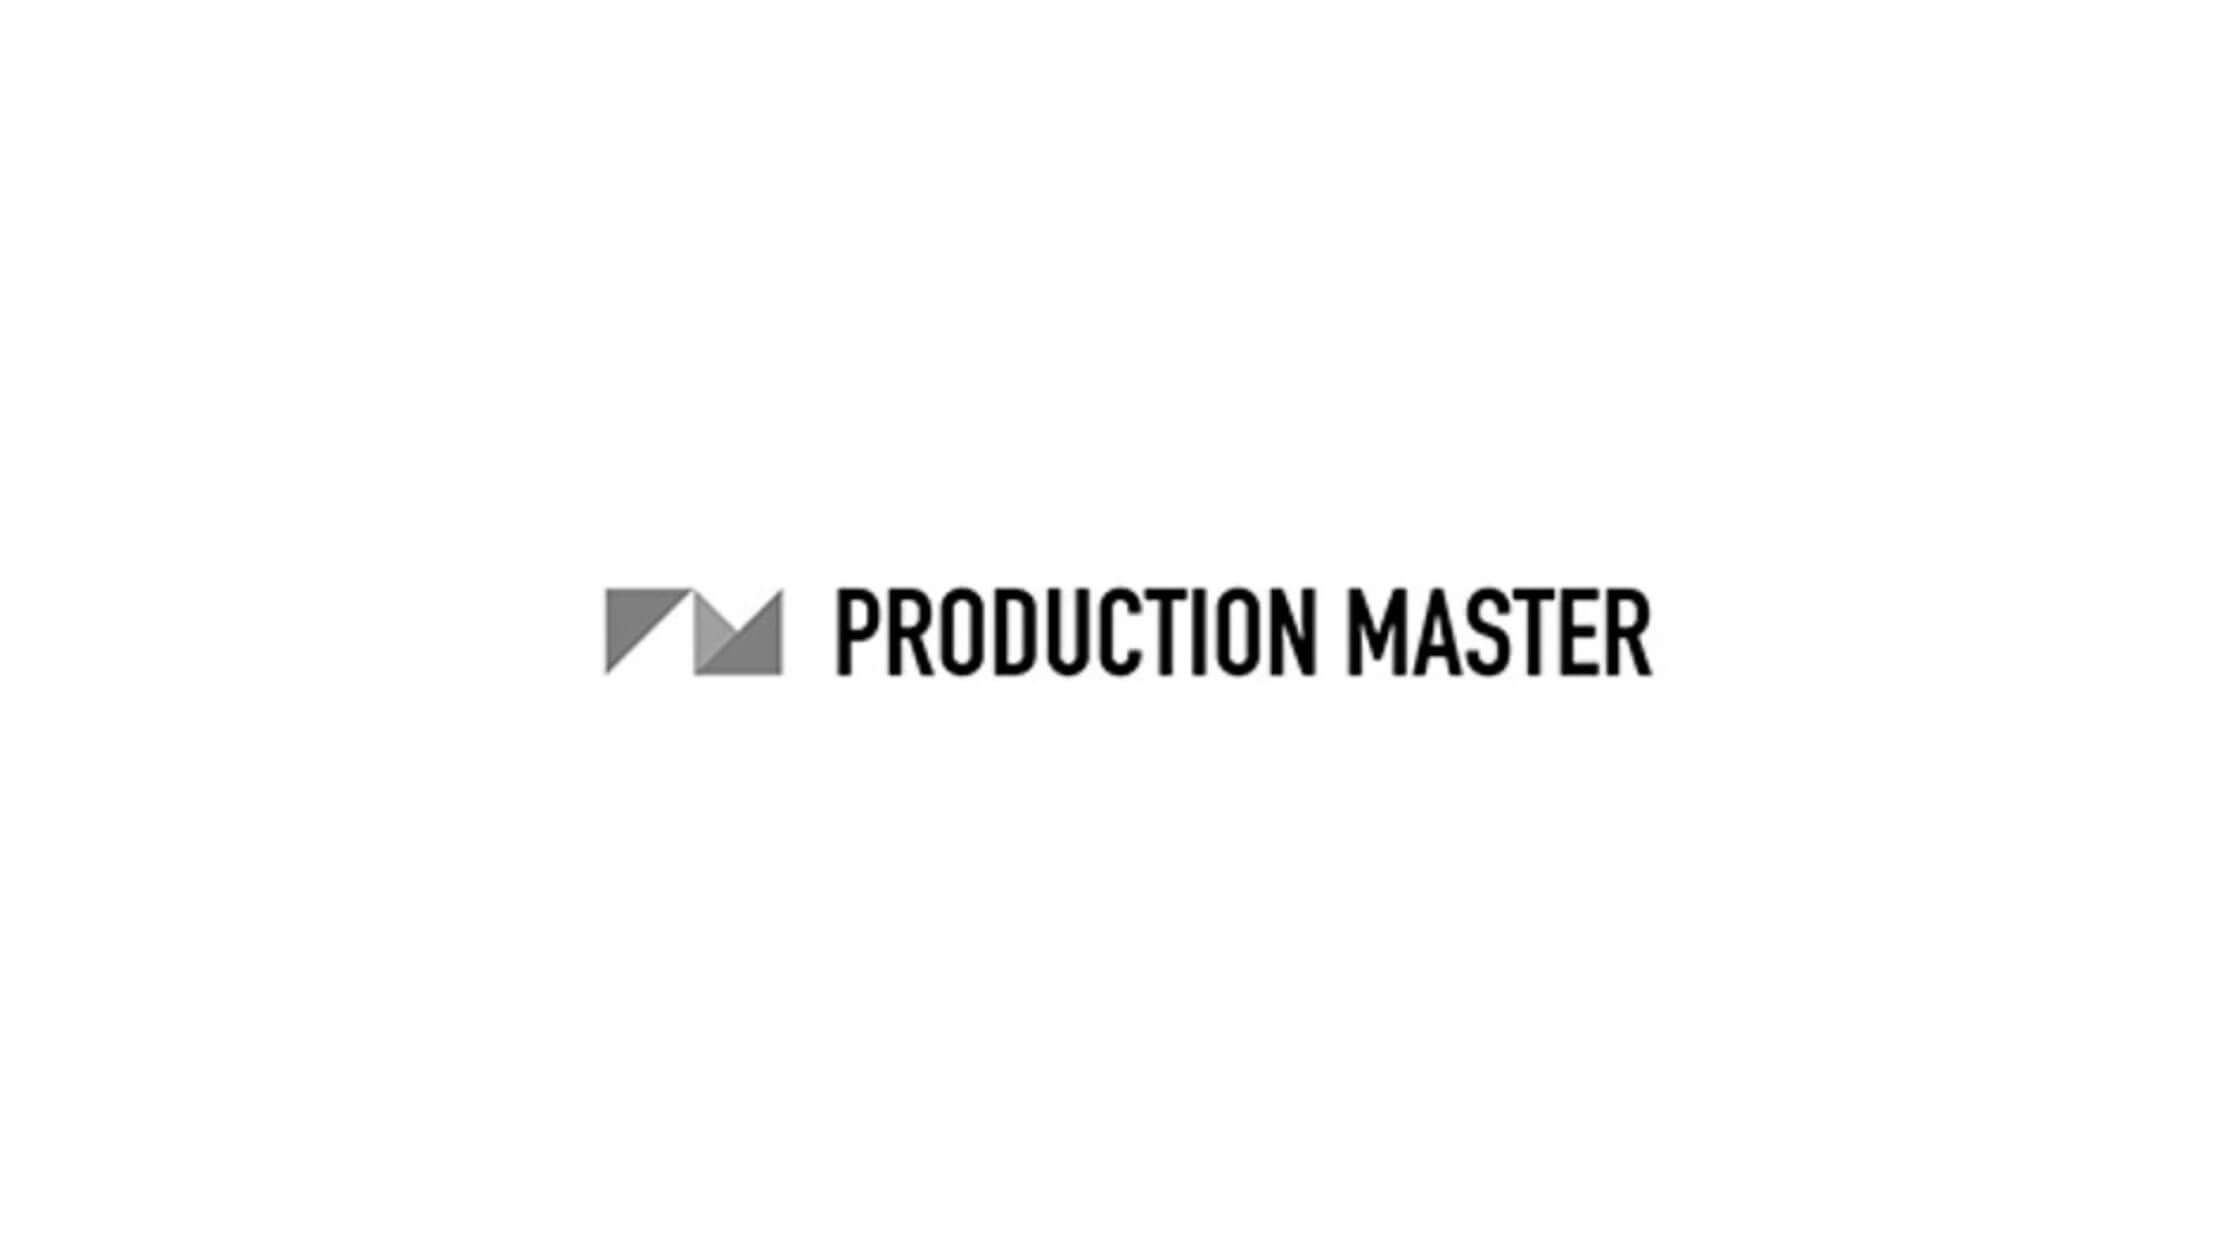 Download Production Master samples on RouteNote Create – download professional DnB, House, Trap, Dubstep, and EDM samples right now